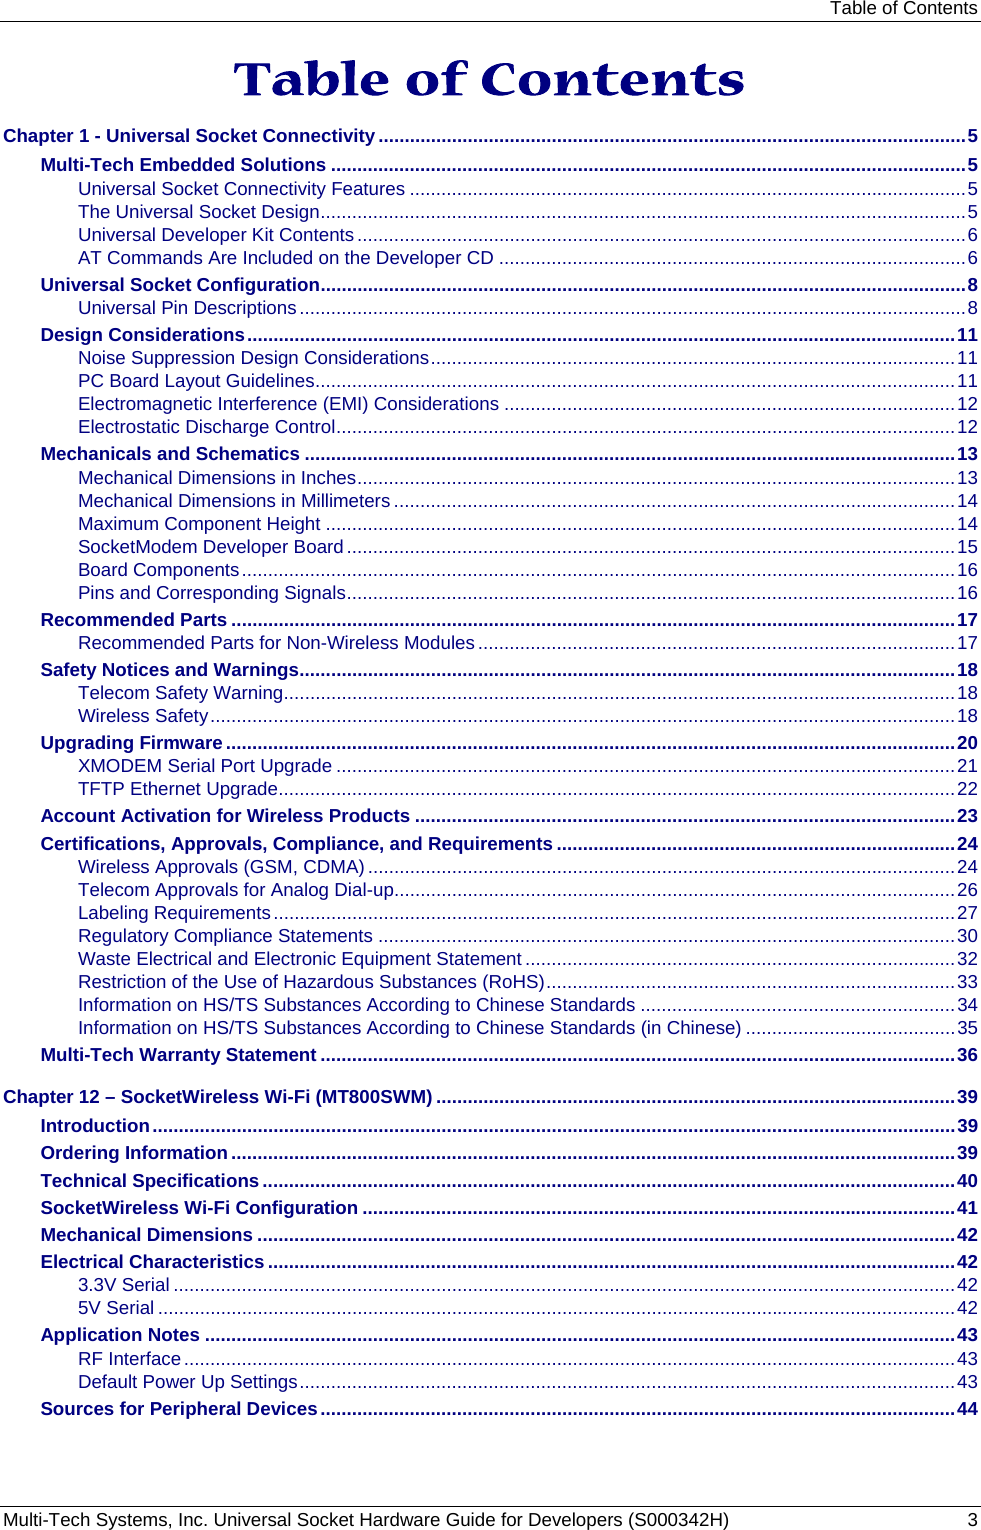 Table of Contents Multi-Tech Systems, Inc. Universal Socket Hardware Guide for Developers (S000342H)  3  Table of Contents Chapter 1 - Universal Socket Connectivity................................................................................................................5 Multi-Tech Embedded Solutions .........................................................................................................................5 Universal Socket Connectivity Features ..........................................................................................................5 The Universal Socket Design...........................................................................................................................5 Universal Developer Kit Contents....................................................................................................................6 AT Commands Are Included on the Developer CD .........................................................................................6 Universal Socket Configuration...........................................................................................................................8 Universal Pin Descriptions...............................................................................................................................8 Design Considerations.......................................................................................................................................11 Noise Suppression Design Considerations....................................................................................................11 PC Board Layout Guidelines..........................................................................................................................11 Electromagnetic Interference (EMI) Considerations ......................................................................................12 Electrostatic Discharge Control......................................................................................................................12 Mechanicals and Schematics ............................................................................................................................13 Mechanical Dimensions in Inches..................................................................................................................13 Mechanical Dimensions in Millimeters ...........................................................................................................14 Maximum Component Height ........................................................................................................................14 SocketModem Developer Board....................................................................................................................15 Board Components........................................................................................................................................16 Pins and Corresponding Signals....................................................................................................................16 Recommended Parts ..........................................................................................................................................17 Recommended Parts for Non-Wireless Modules...........................................................................................17 Safety Notices and Warnings.............................................................................................................................18 Telecom Safety Warning................................................................................................................................18 Wireless Safety..............................................................................................................................................18 Upgrading Firmware ...........................................................................................................................................20 XMODEM Serial Port Upgrade ......................................................................................................................21 TFTP Ethernet Upgrade.................................................................................................................................22 Account Activation for Wireless Products .......................................................................................................23 Certifications, Approvals, Compliance, and Requirements ............................................................................24 Wireless Approvals (GSM, CDMA) ................................................................................................................24 Telecom Approvals for Analog Dial-up...........................................................................................................26 Labeling Requirements..................................................................................................................................27 Regulatory Compliance Statements ..............................................................................................................30 Waste Electrical and Electronic Equipment Statement ..................................................................................32 Restriction of the Use of Hazardous Substances (RoHS)..............................................................................33 Information on HS/TS Substances According to Chinese Standards ............................................................34 Information on HS/TS Substances According to Chinese Standards (in Chinese) ........................................35 Multi-Tech Warranty Statement .........................................................................................................................36 Chapter 12 – SocketWireless Wi-Fi (MT800SWM) ...................................................................................................39 Introduction.........................................................................................................................................................39 Ordering Information..........................................................................................................................................39 Technical Specifications ....................................................................................................................................40 SocketWireless Wi-Fi Configuration .................................................................................................................41 Mechanical Dimensions .....................................................................................................................................42 Electrical Characteristics ...................................................................................................................................42 3.3V Serial .....................................................................................................................................................42 5V Serial ........................................................................................................................................................42 Application Notes ...............................................................................................................................................43 RF Interface...................................................................................................................................................43 Default Power Up Settings.............................................................................................................................43 Sources for Peripheral Devices.........................................................................................................................44 